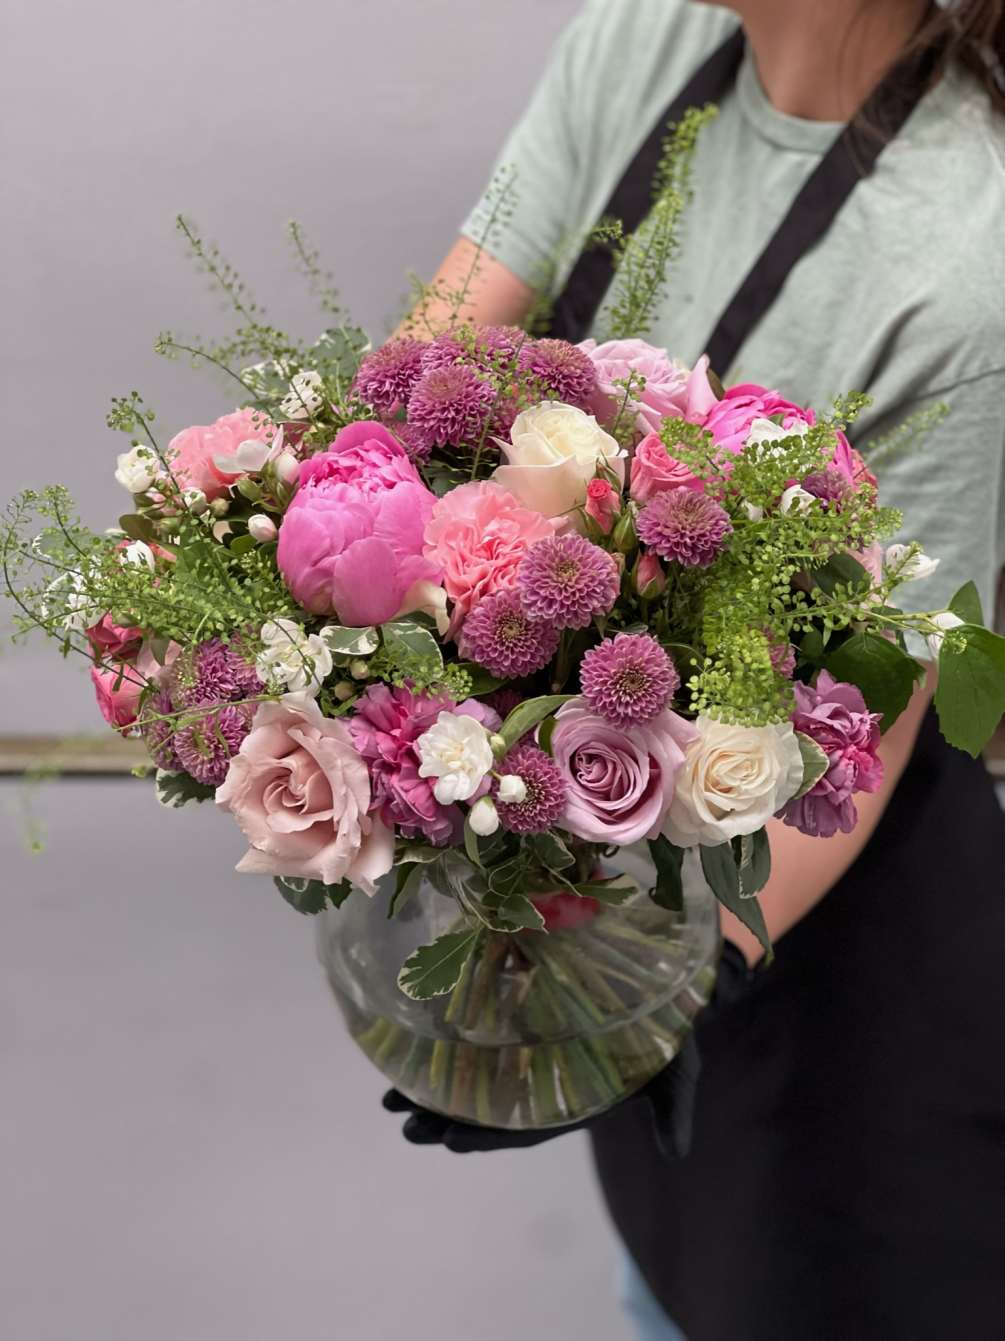 Arrangement in a vase of roses, chrysanthemum, carnations, peony, waxflower, greenery. Perfect